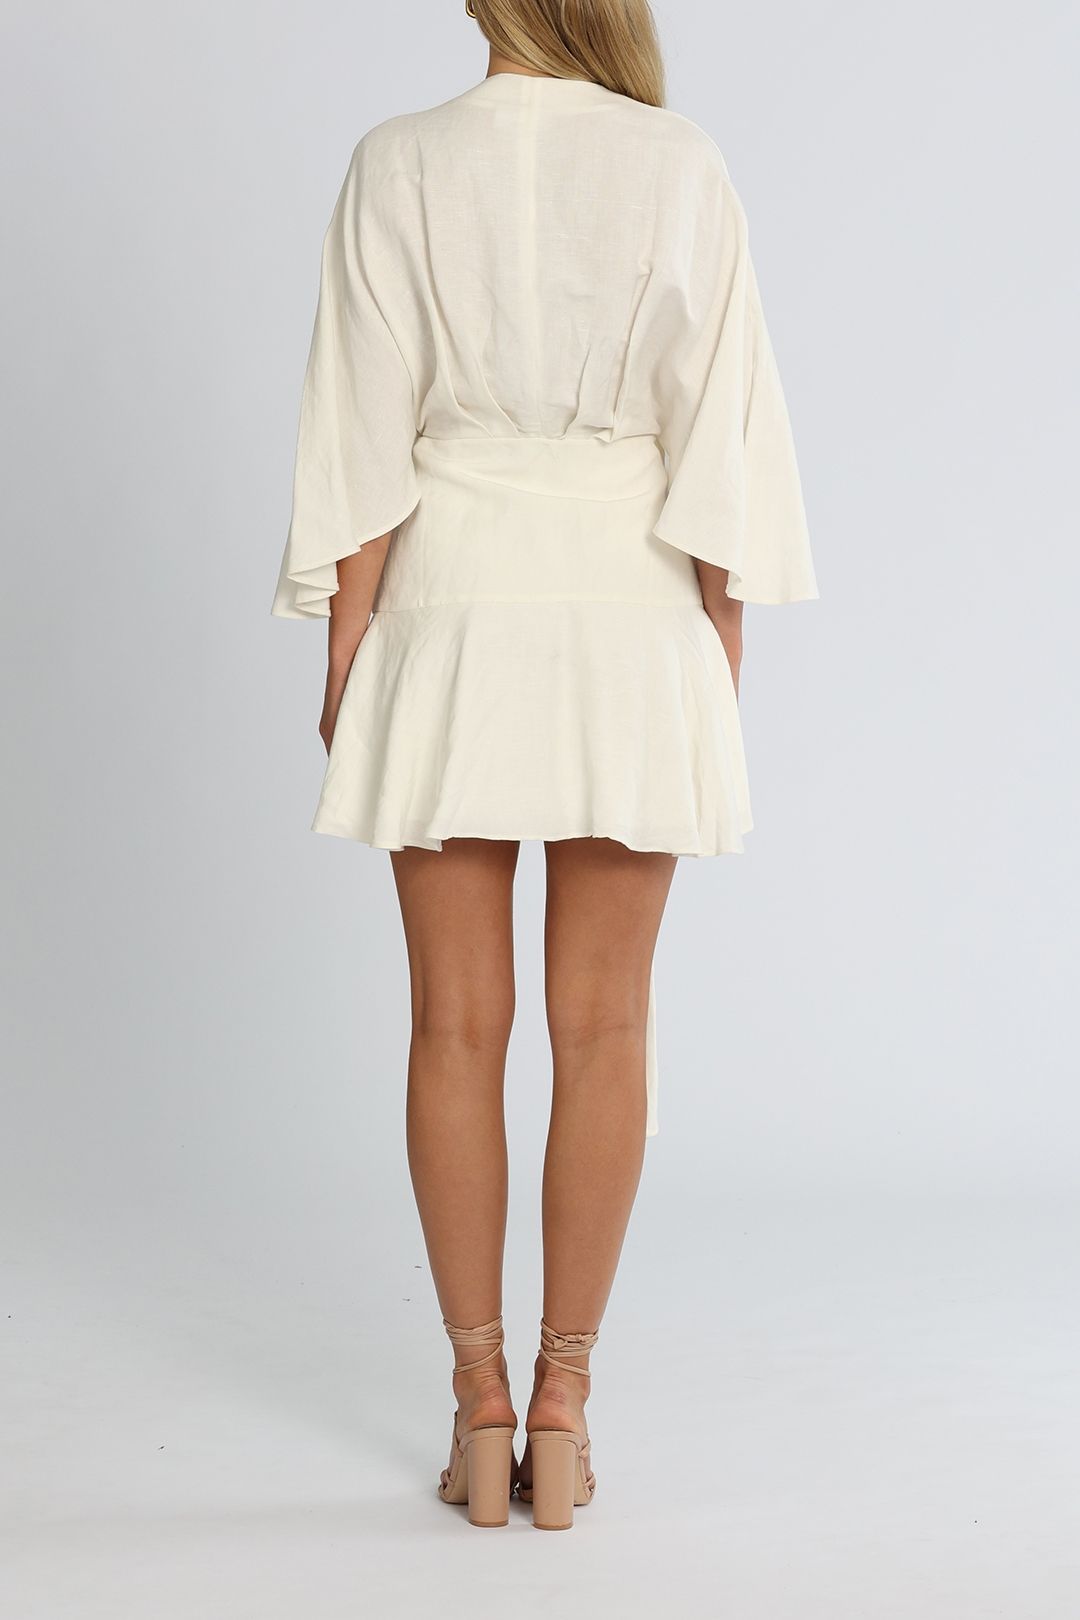 Significant Other Olivia Dress Ivory Wrap